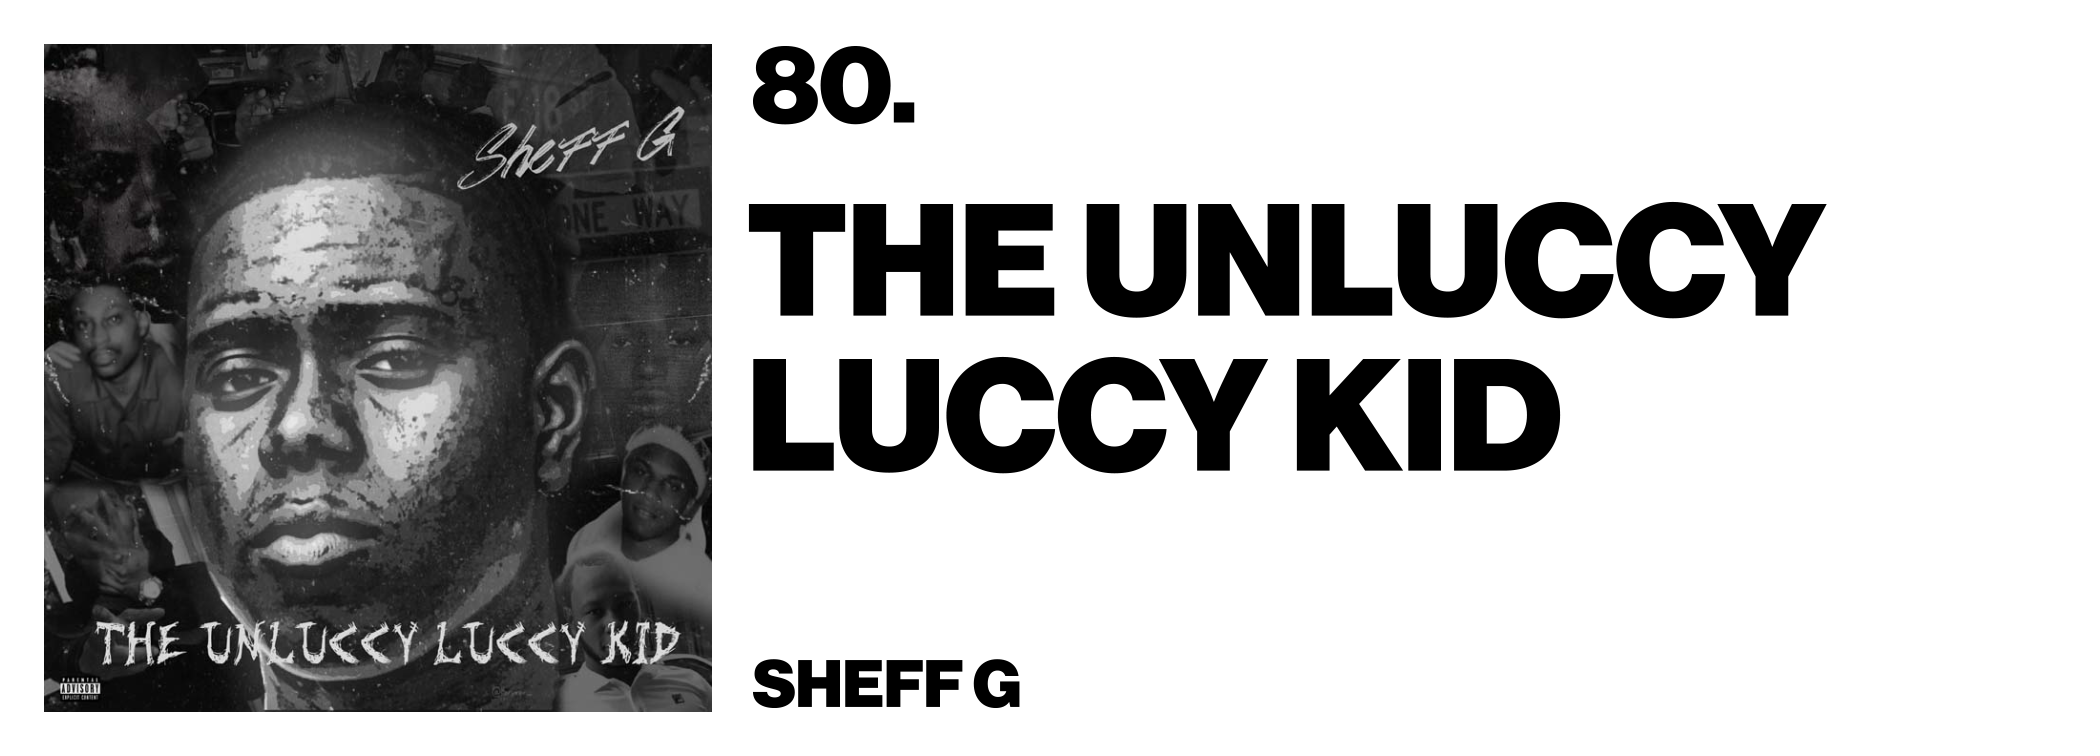 1575921453622-80-Sheff-G-The-Unluccy-Luccy-Kid